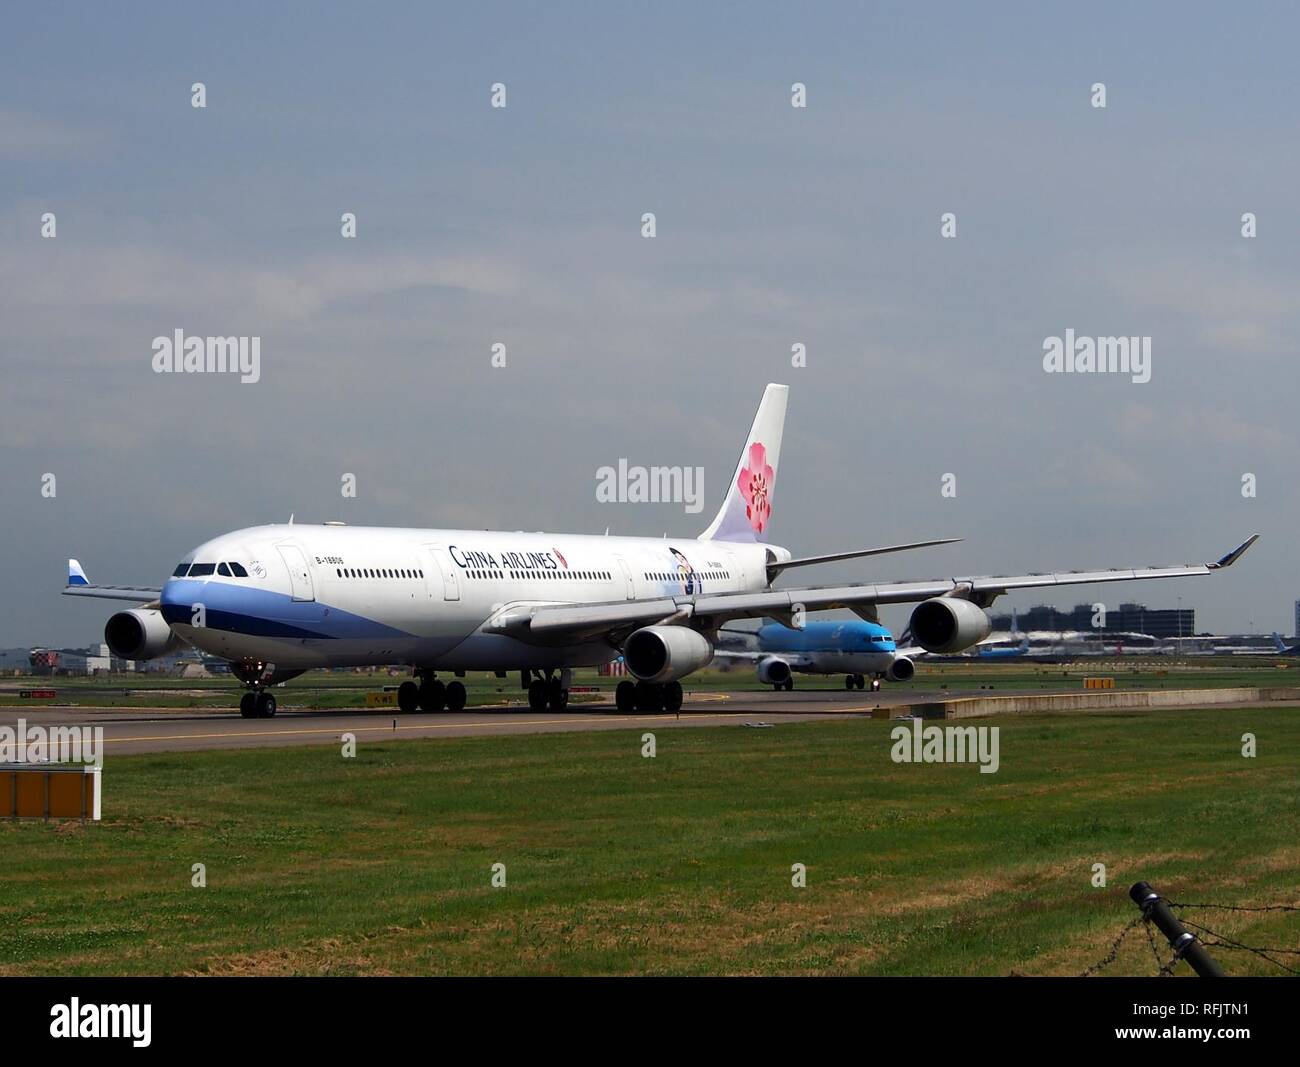 B-18806 China Airlines Airbus A340-313X - cn 433 pic1. Stock Photo